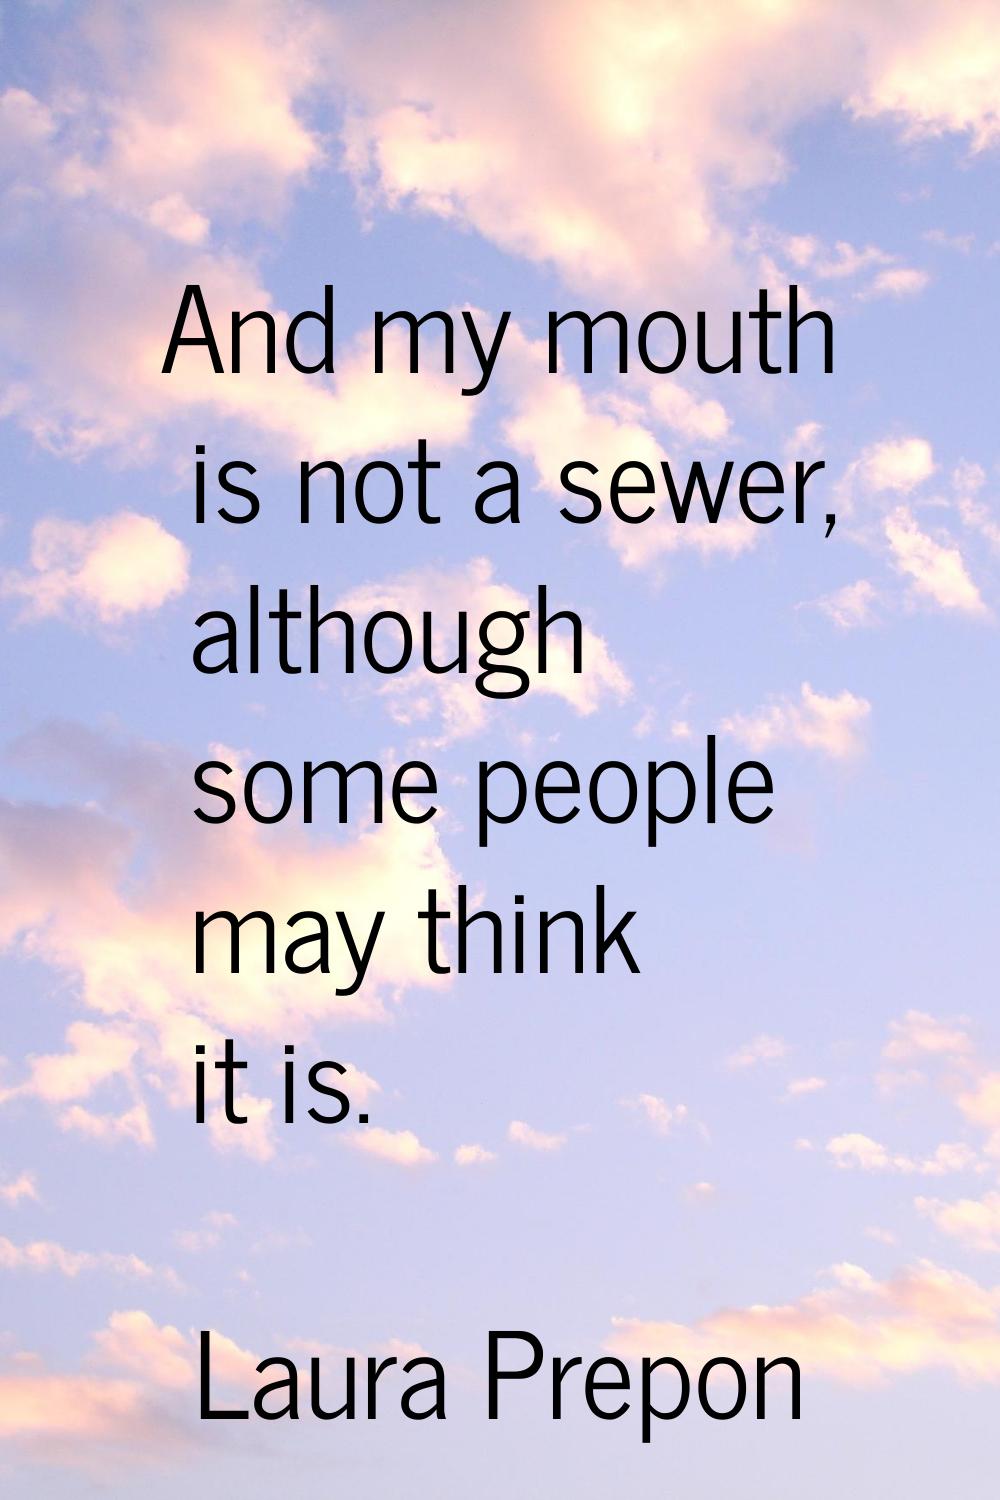 And my mouth is not a sewer, although some people may think it is.